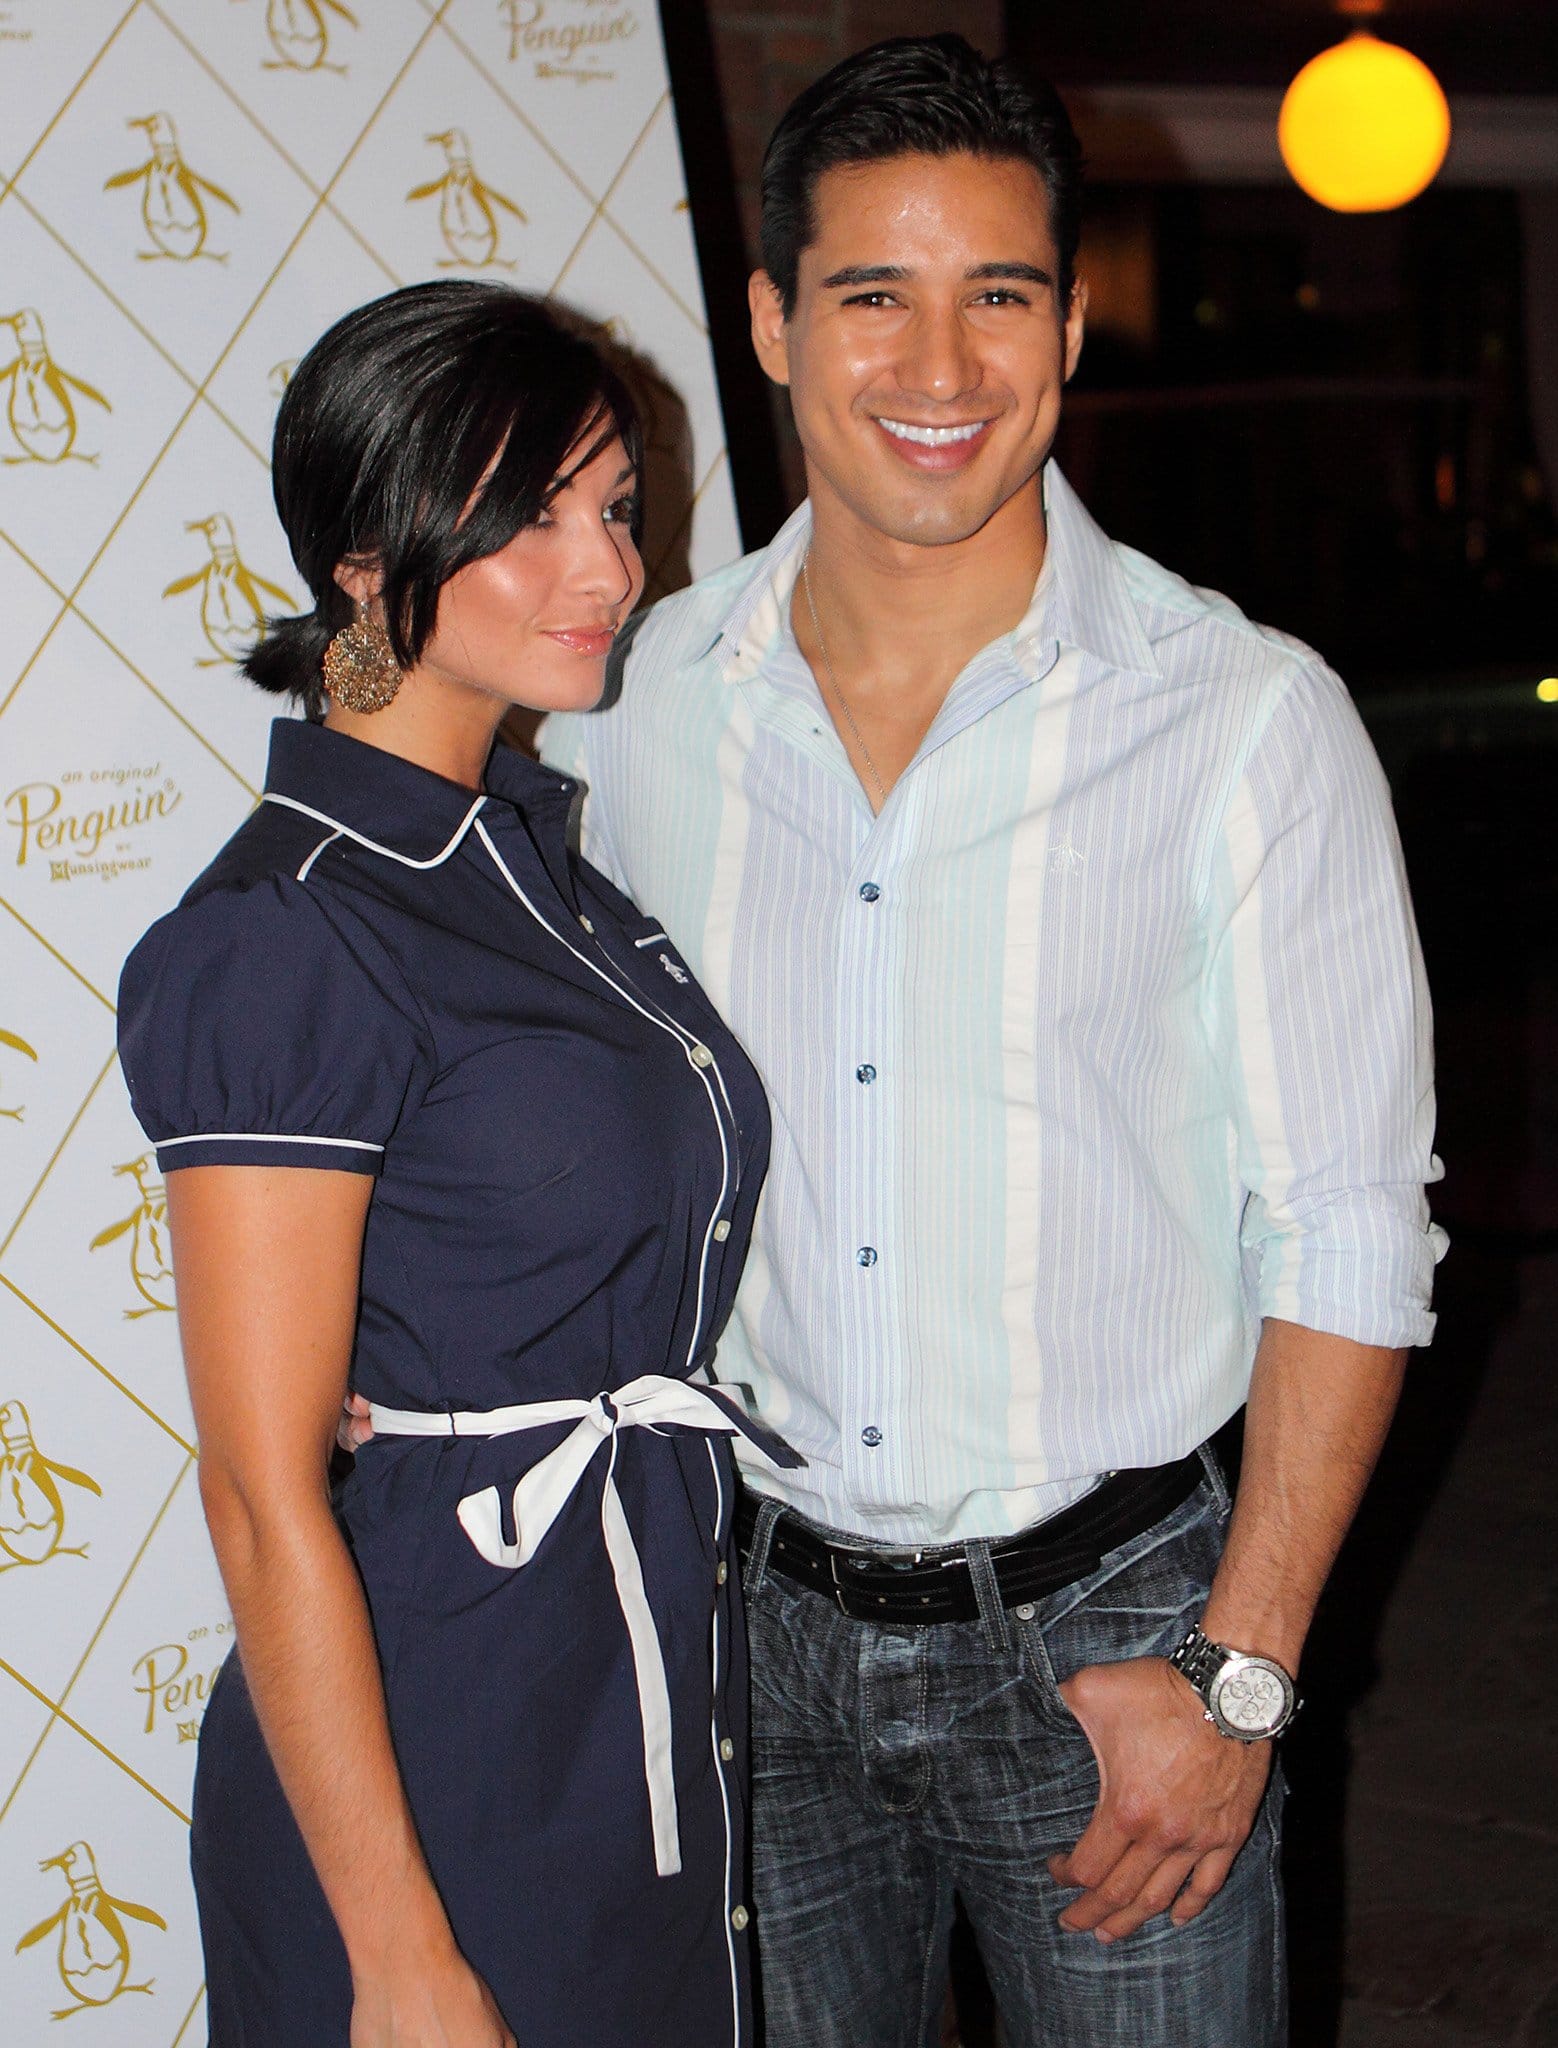 Courtney Laine Mazza and Mario Lopez first met while working on the Broadway show A Chorus Line in 2008